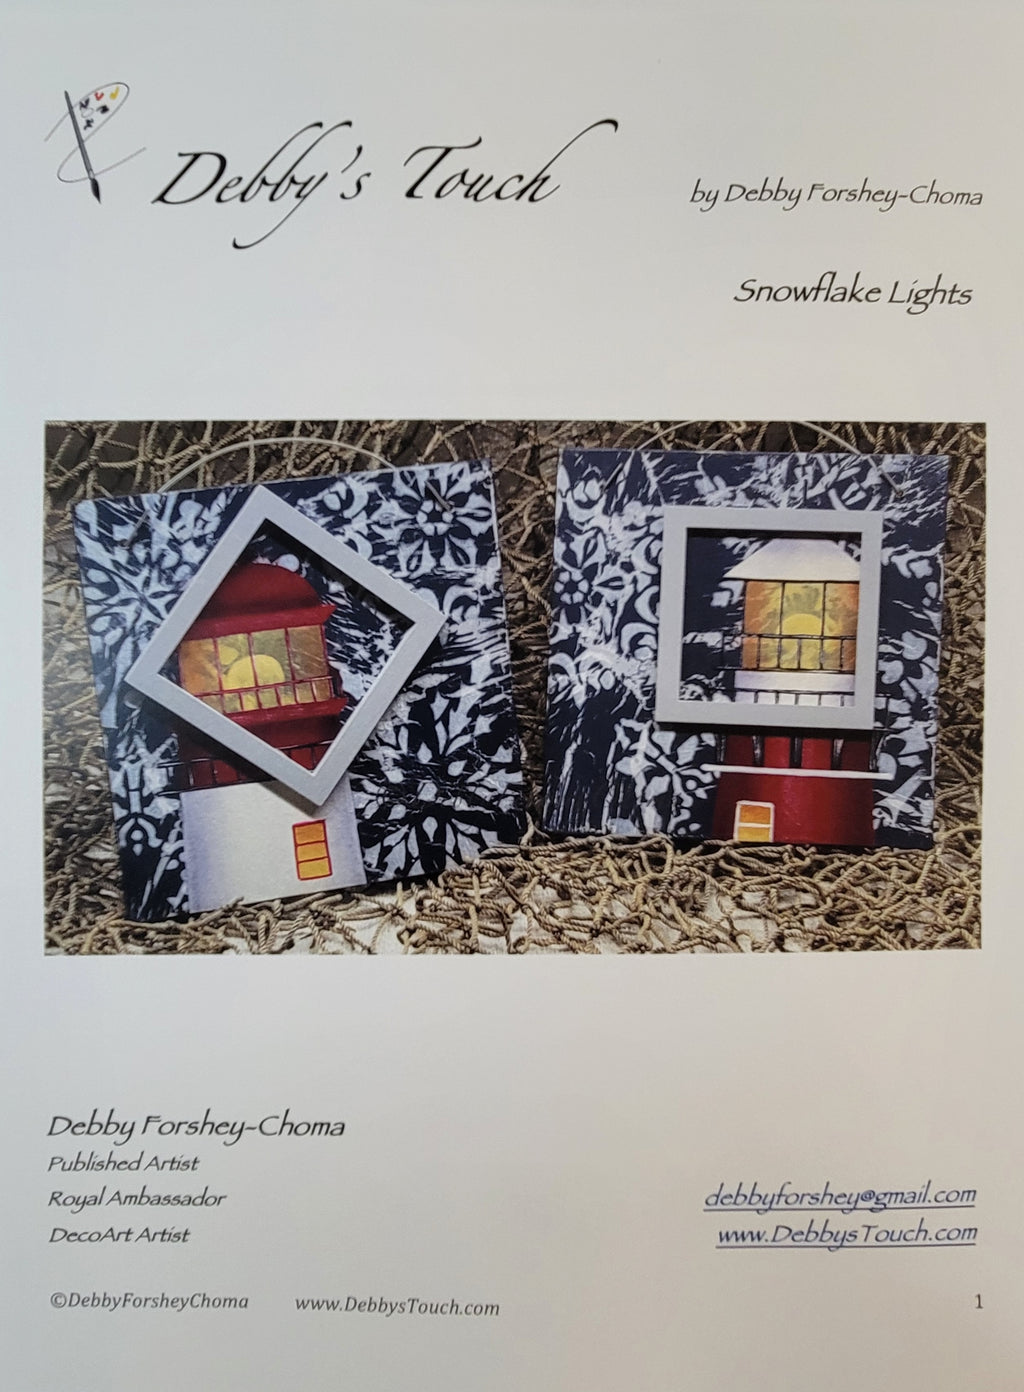 Snowflake Lights packet by Debby Forshey-Choma